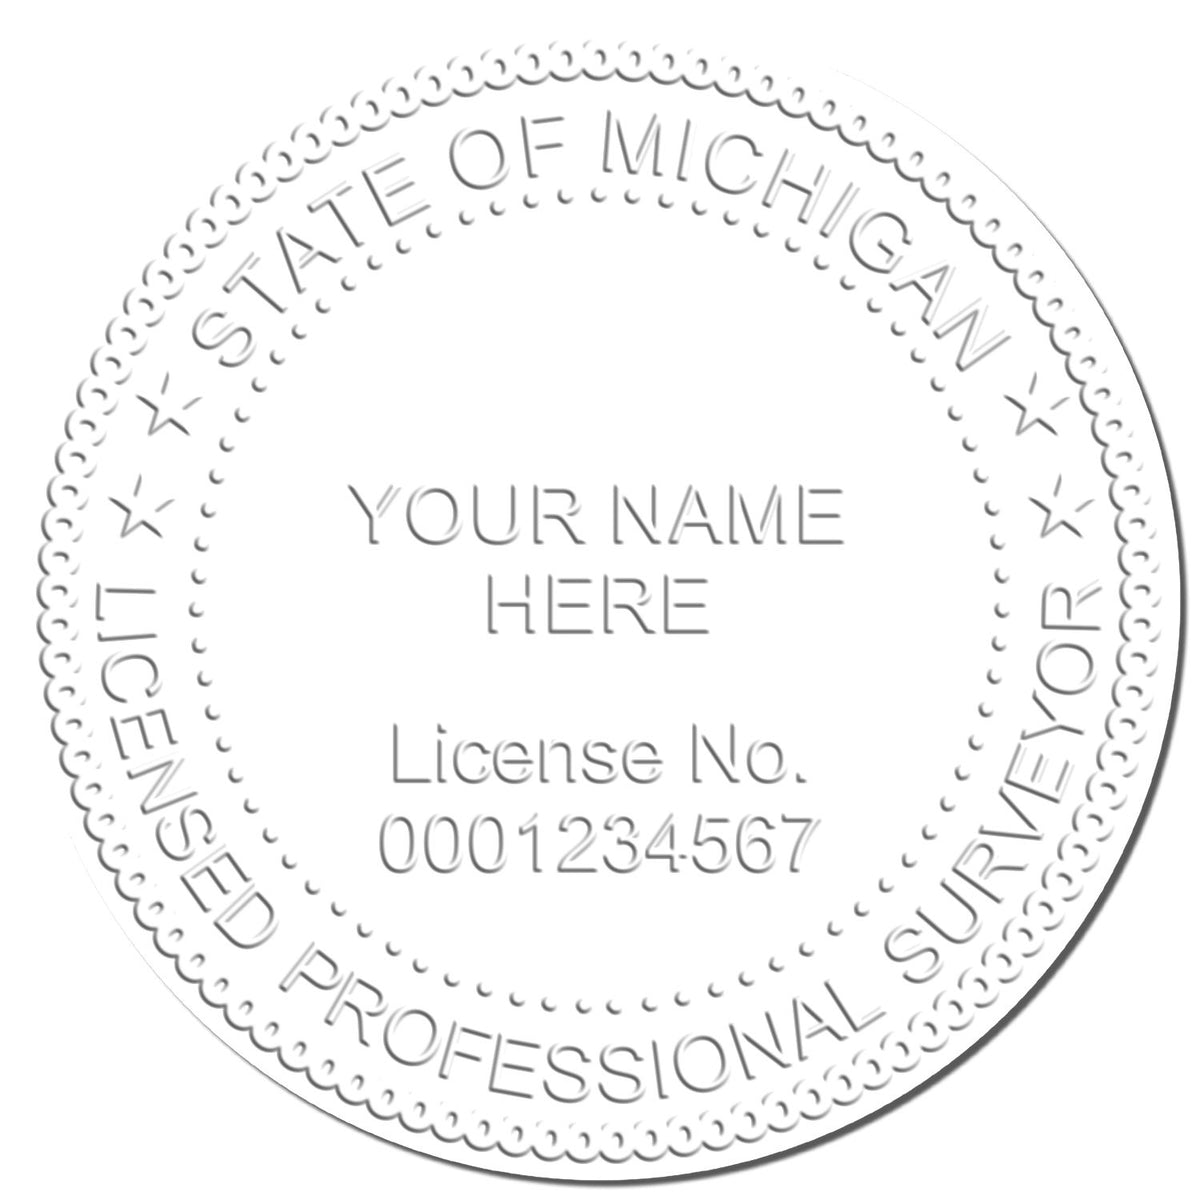 This paper is stamped with a sample imprint of the Long Reach Michigan Land Surveyor Seal, signifying its quality and reliability.